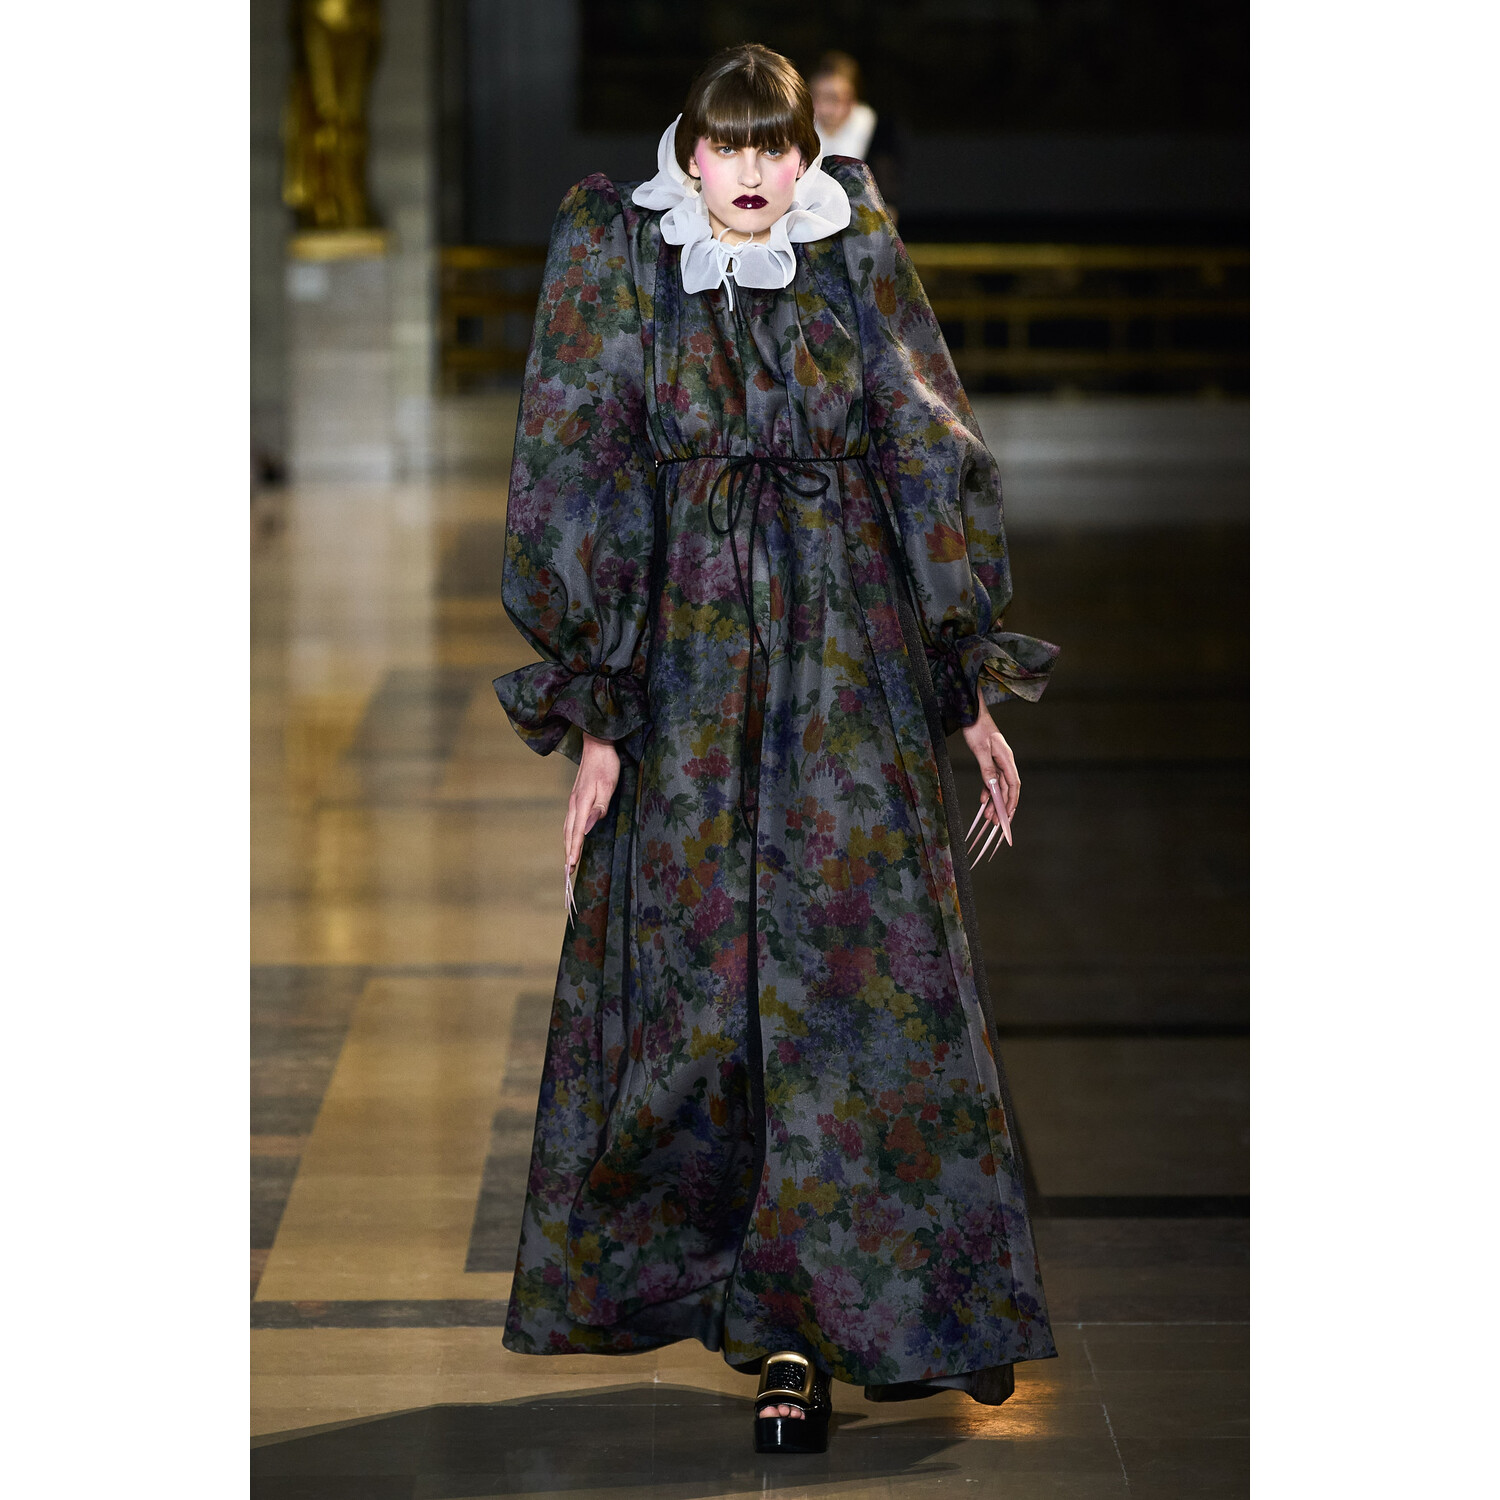 Фото Viktor and Rolf Couture Spring 2022 Collection / Viktor and Rolf Couture весна-лето 2022